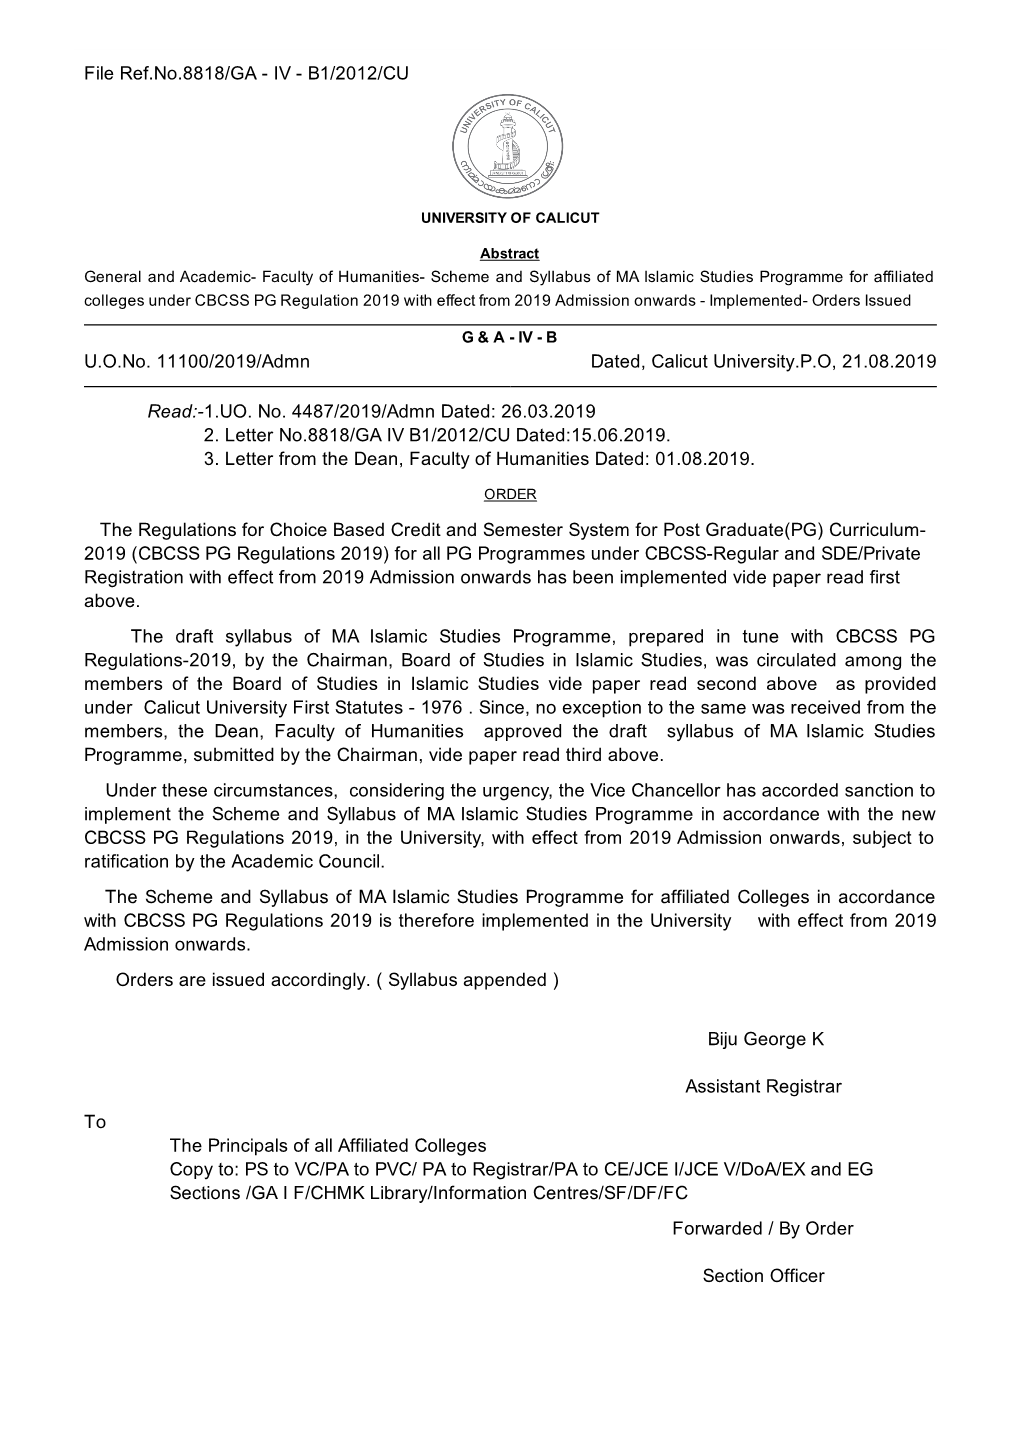 Syllabus of MA Islamic Studies Programme for Affiliated Colleges Under CBCSS PG Regulation 2019 with Effect from 2019 Admission Onwards - Implemented- Orders Issued